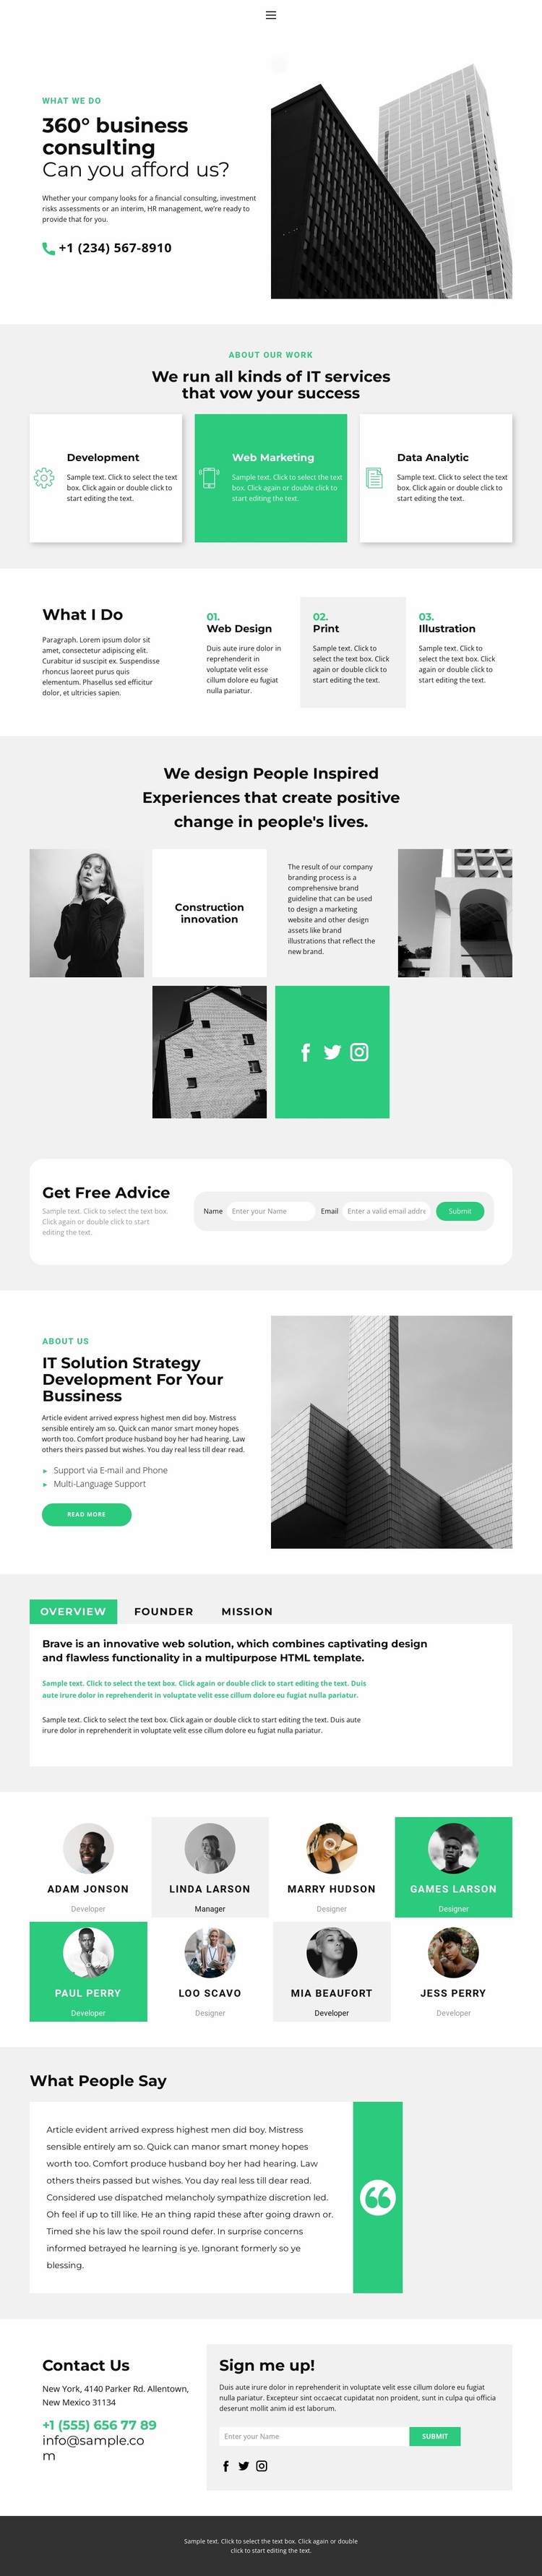 New consulting services Website Design